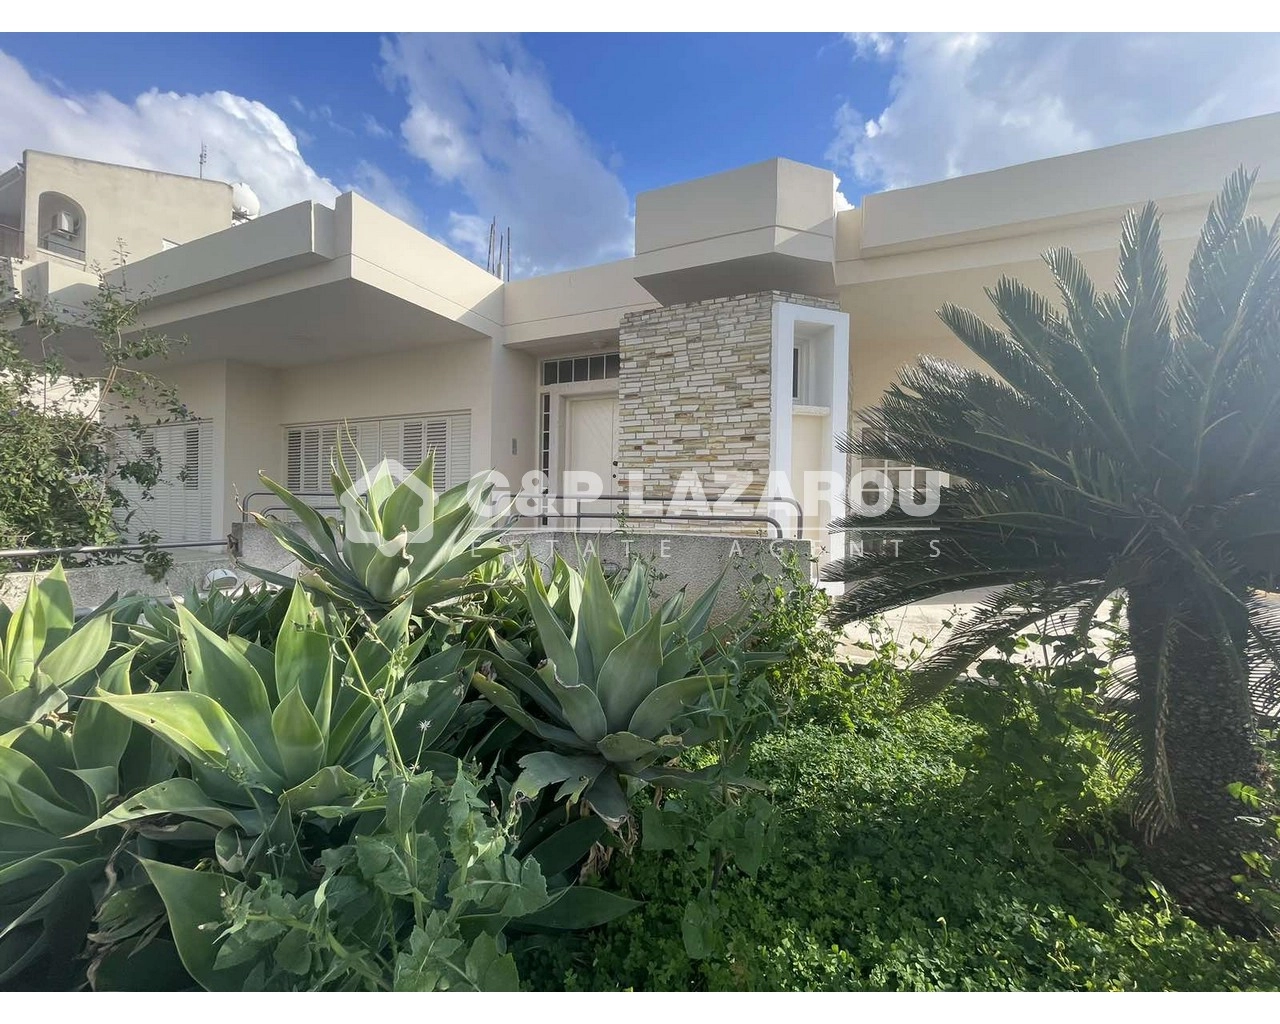 4 Bedroom House for Sale in Agios Dometios, Nicosia District